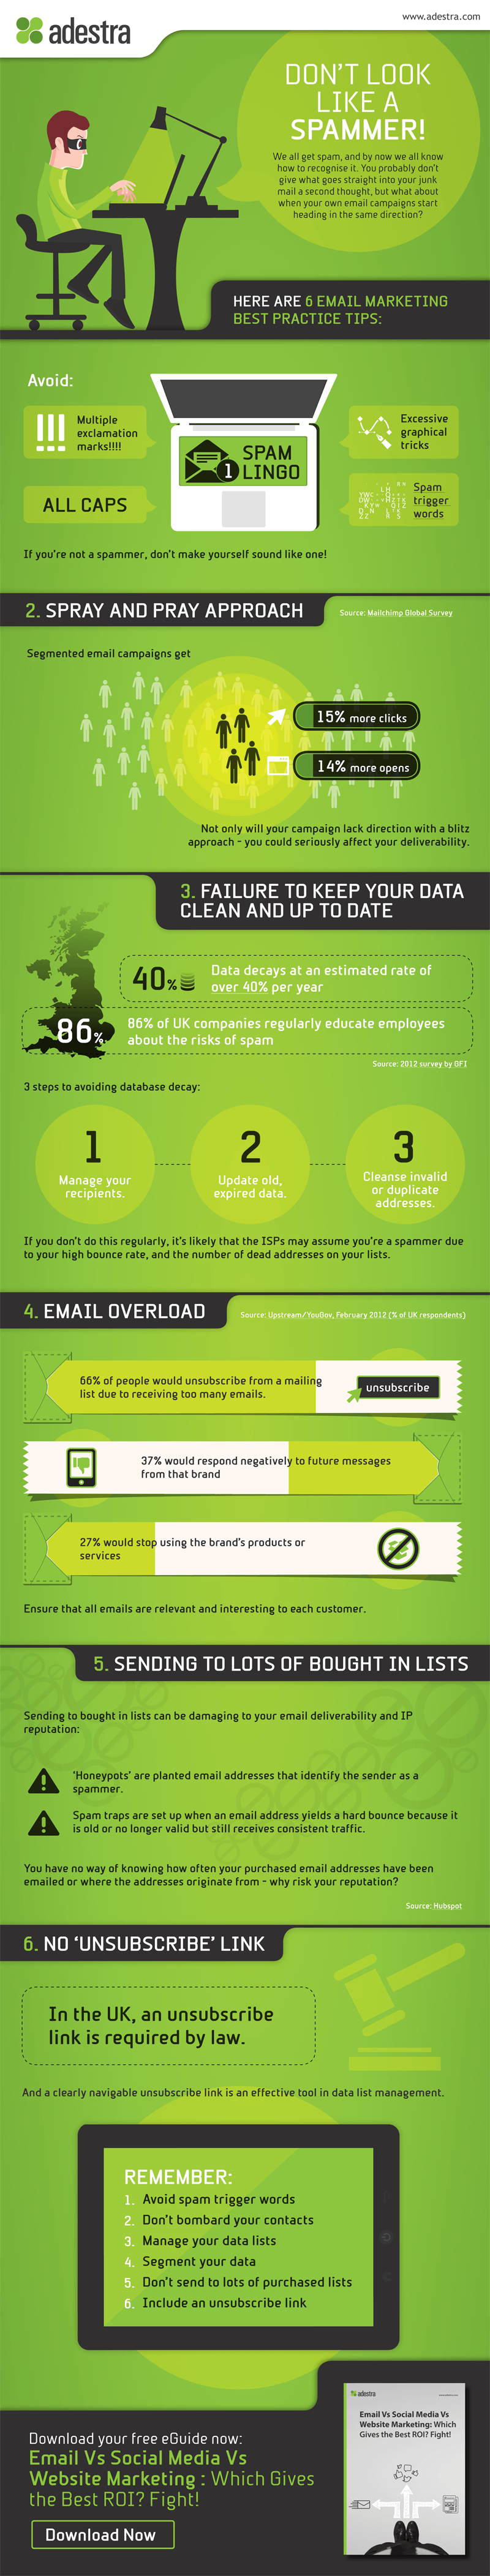 6 Steps To Email Marketing Best Practice - #infographic